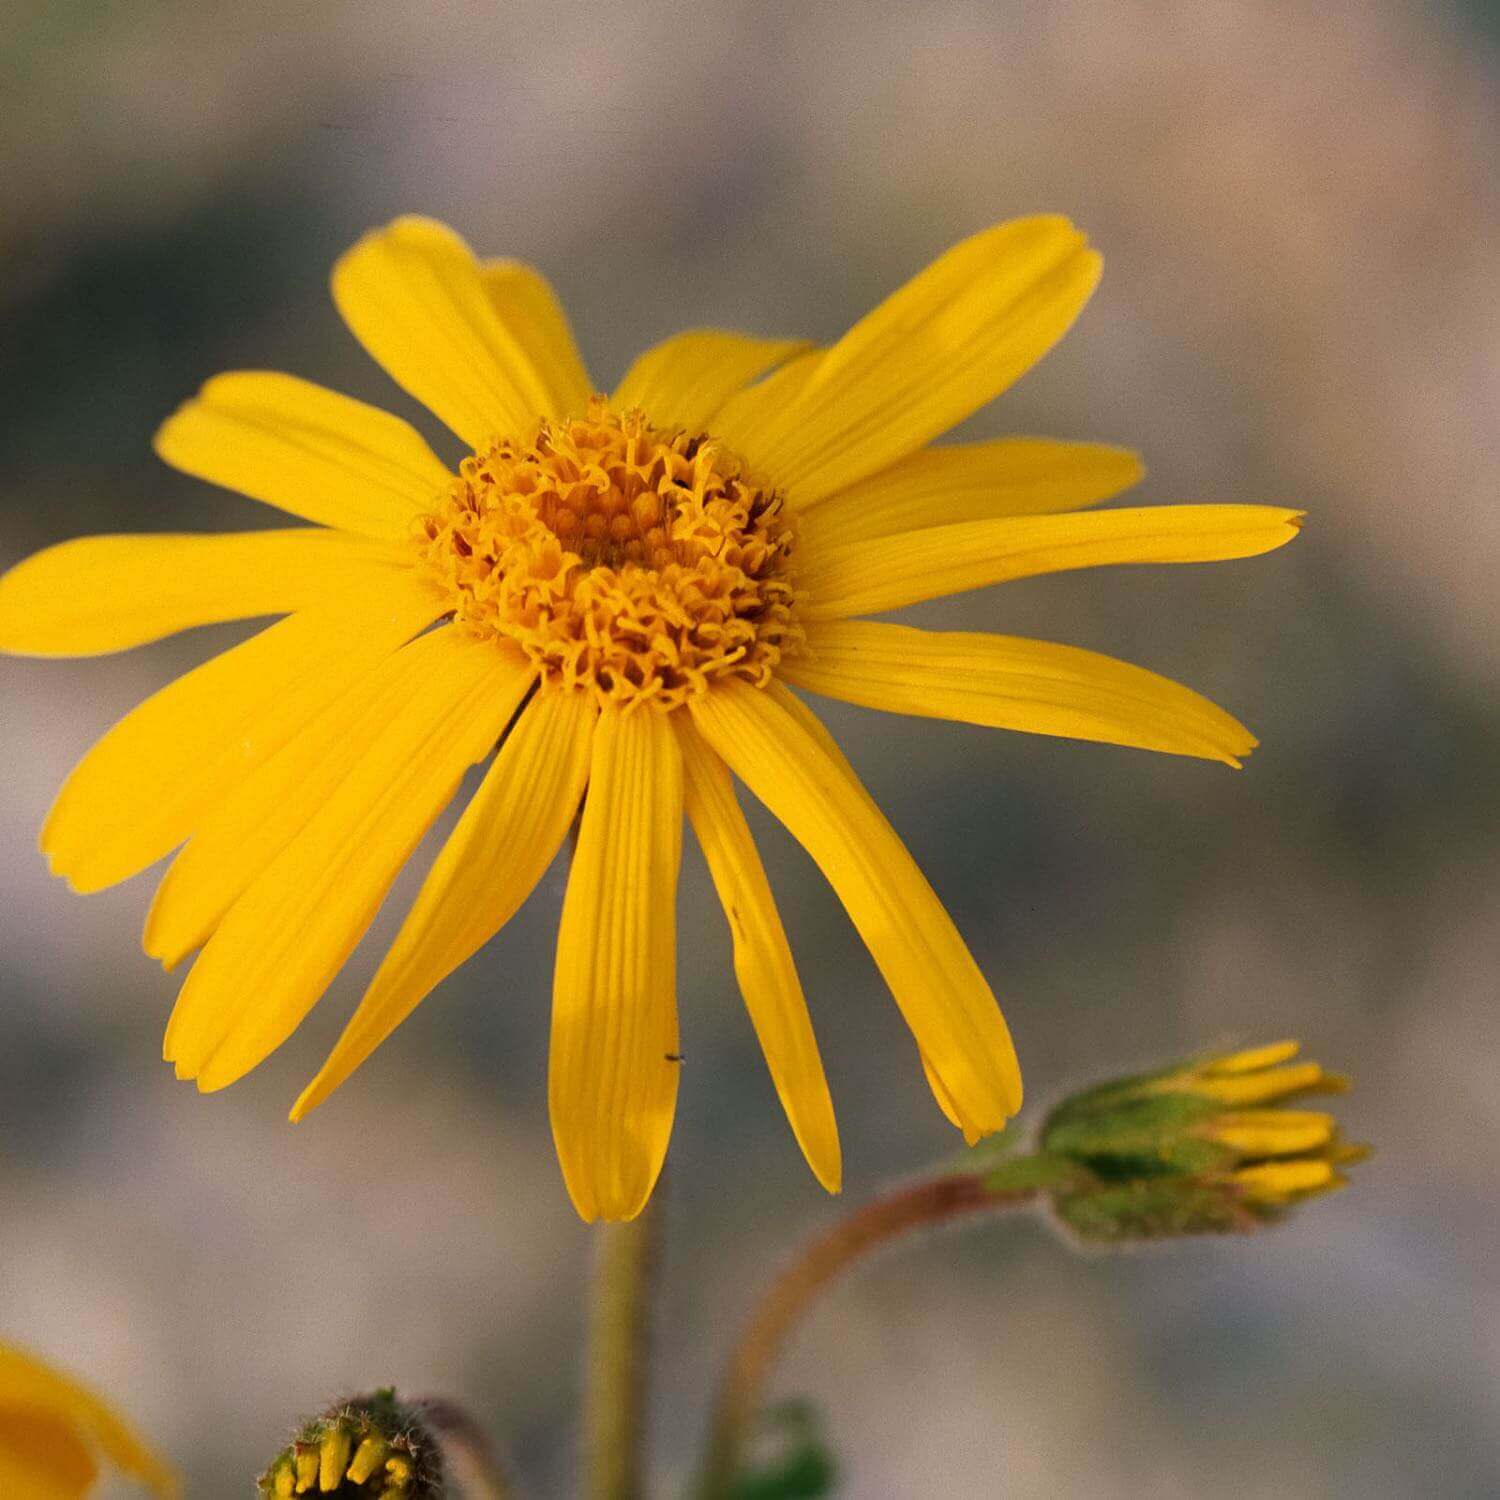 What Is Arnica Montana Flower Used For?